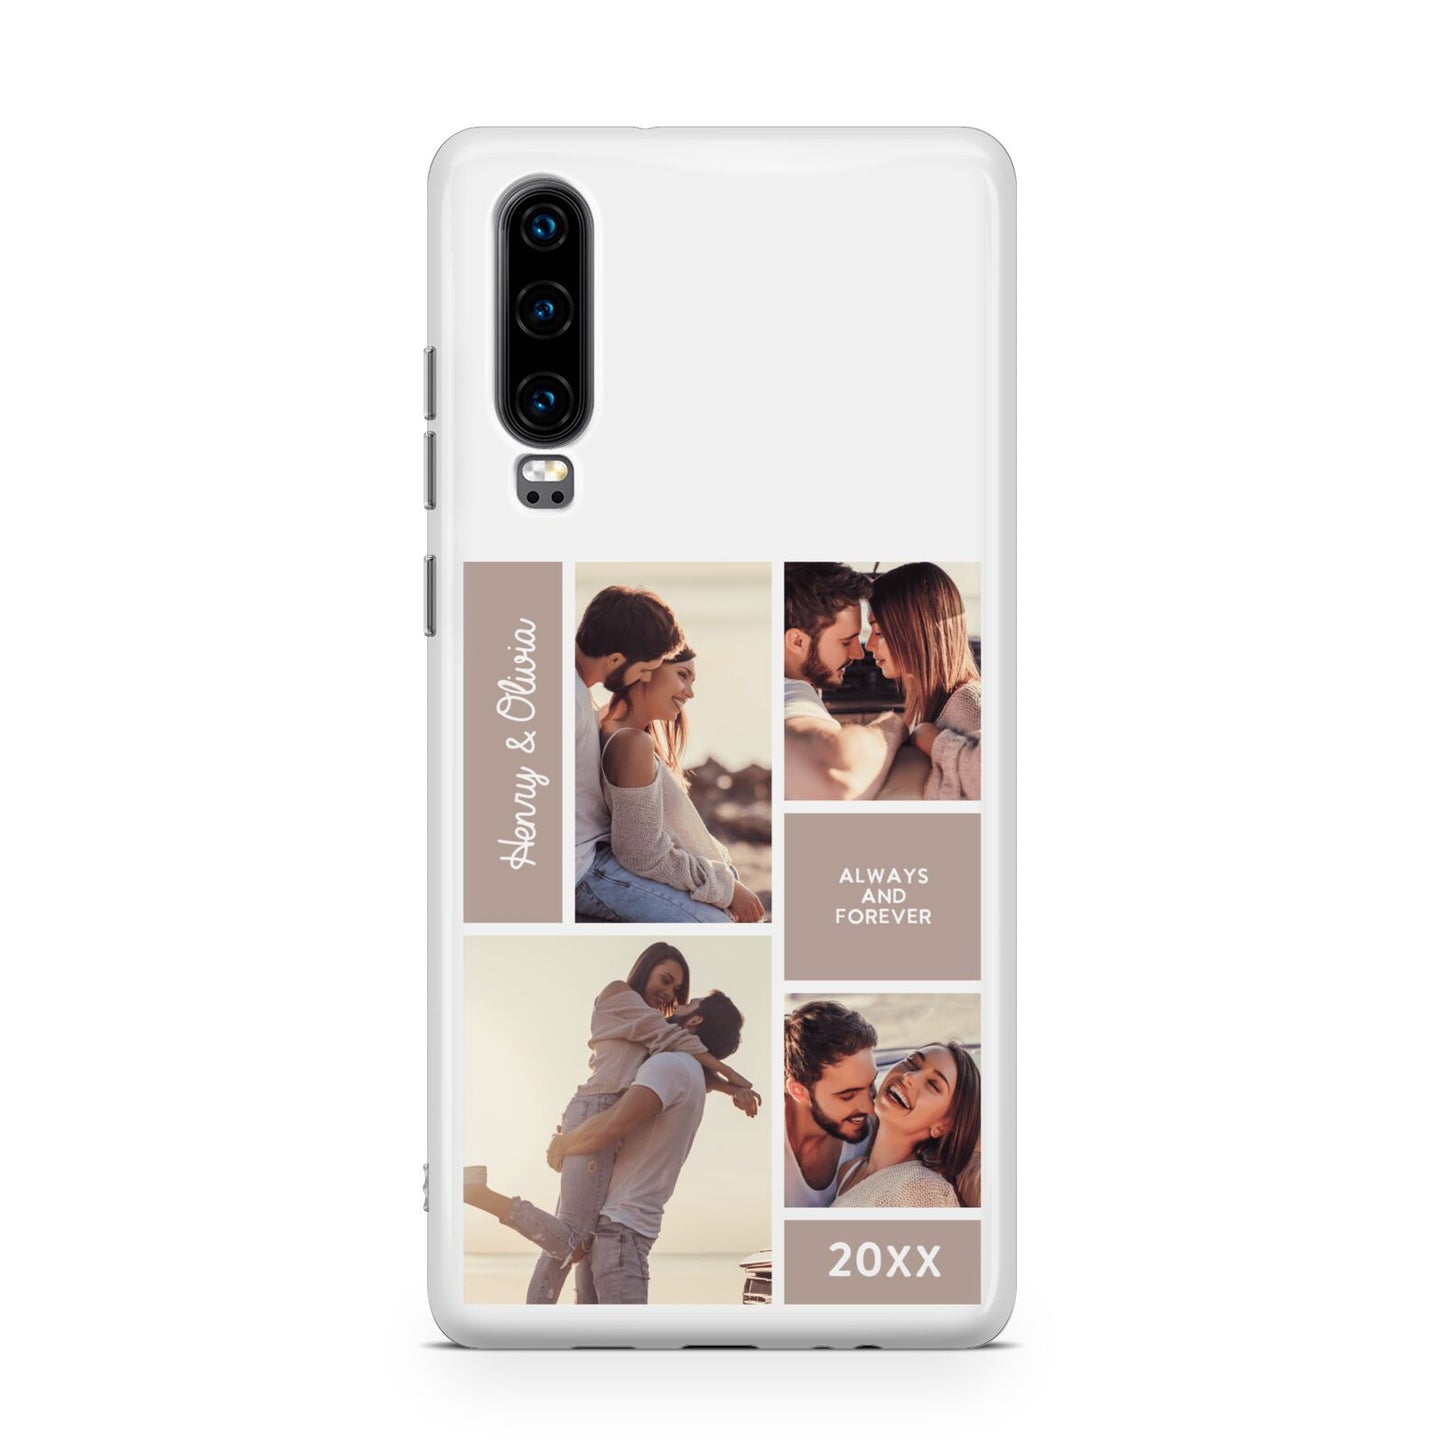 Couples Valentine Photo Collage Personalised Huawei P30 Phone Case